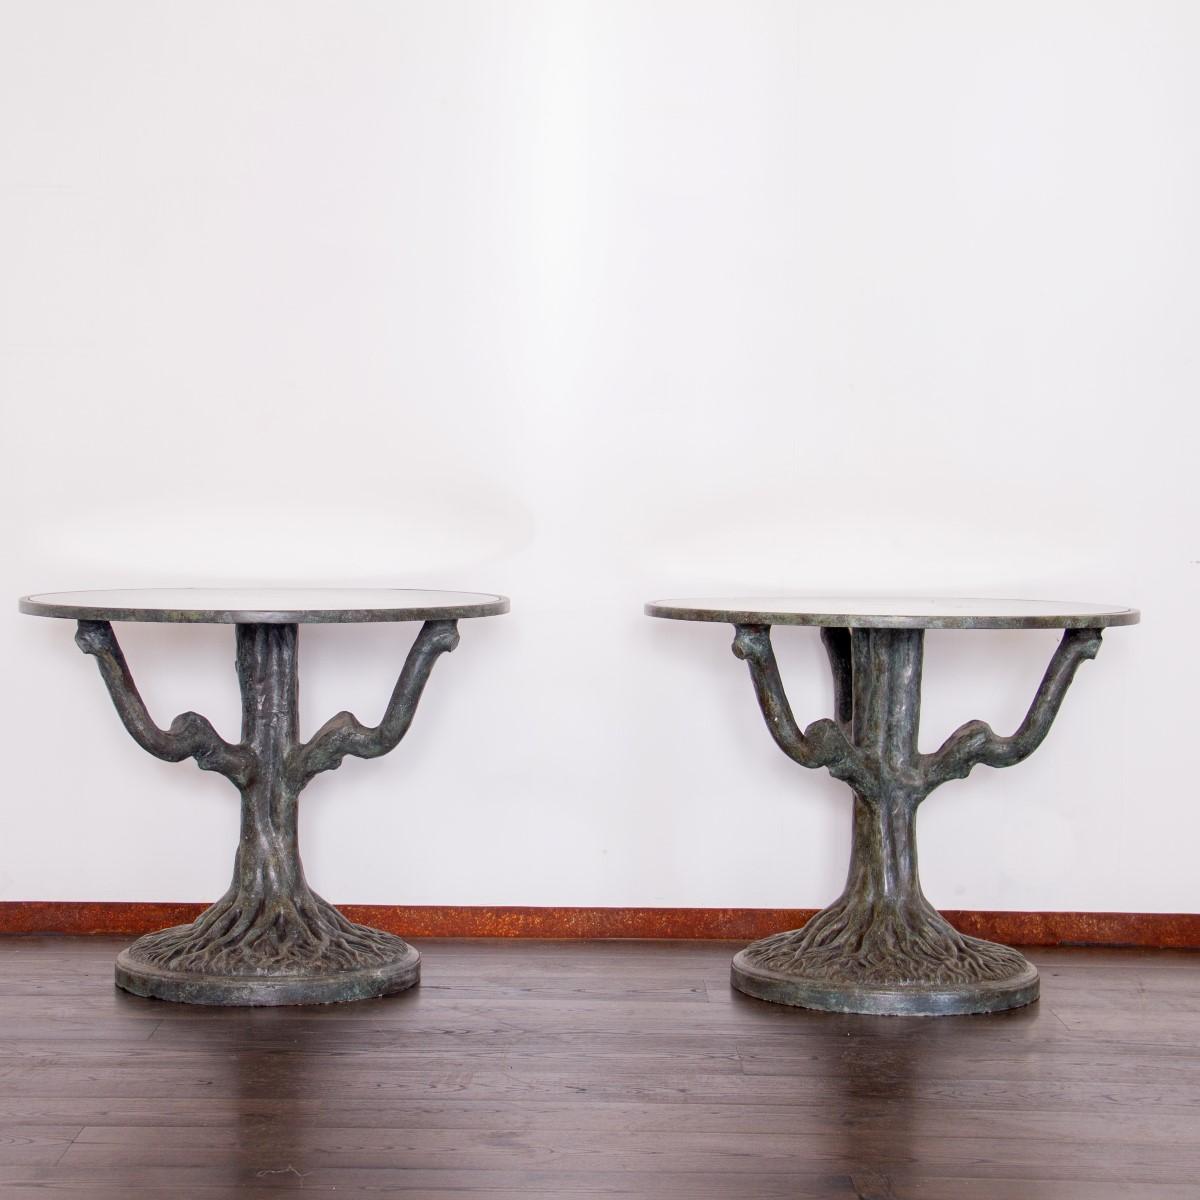 A stunning pair of 1960s romantic  side tables on whimsical sculptural tree trunk bases complete with detailed roots, finished in a green bronze patina. The circular tops have antique mirror inset tops.

These tables are large and can be used as